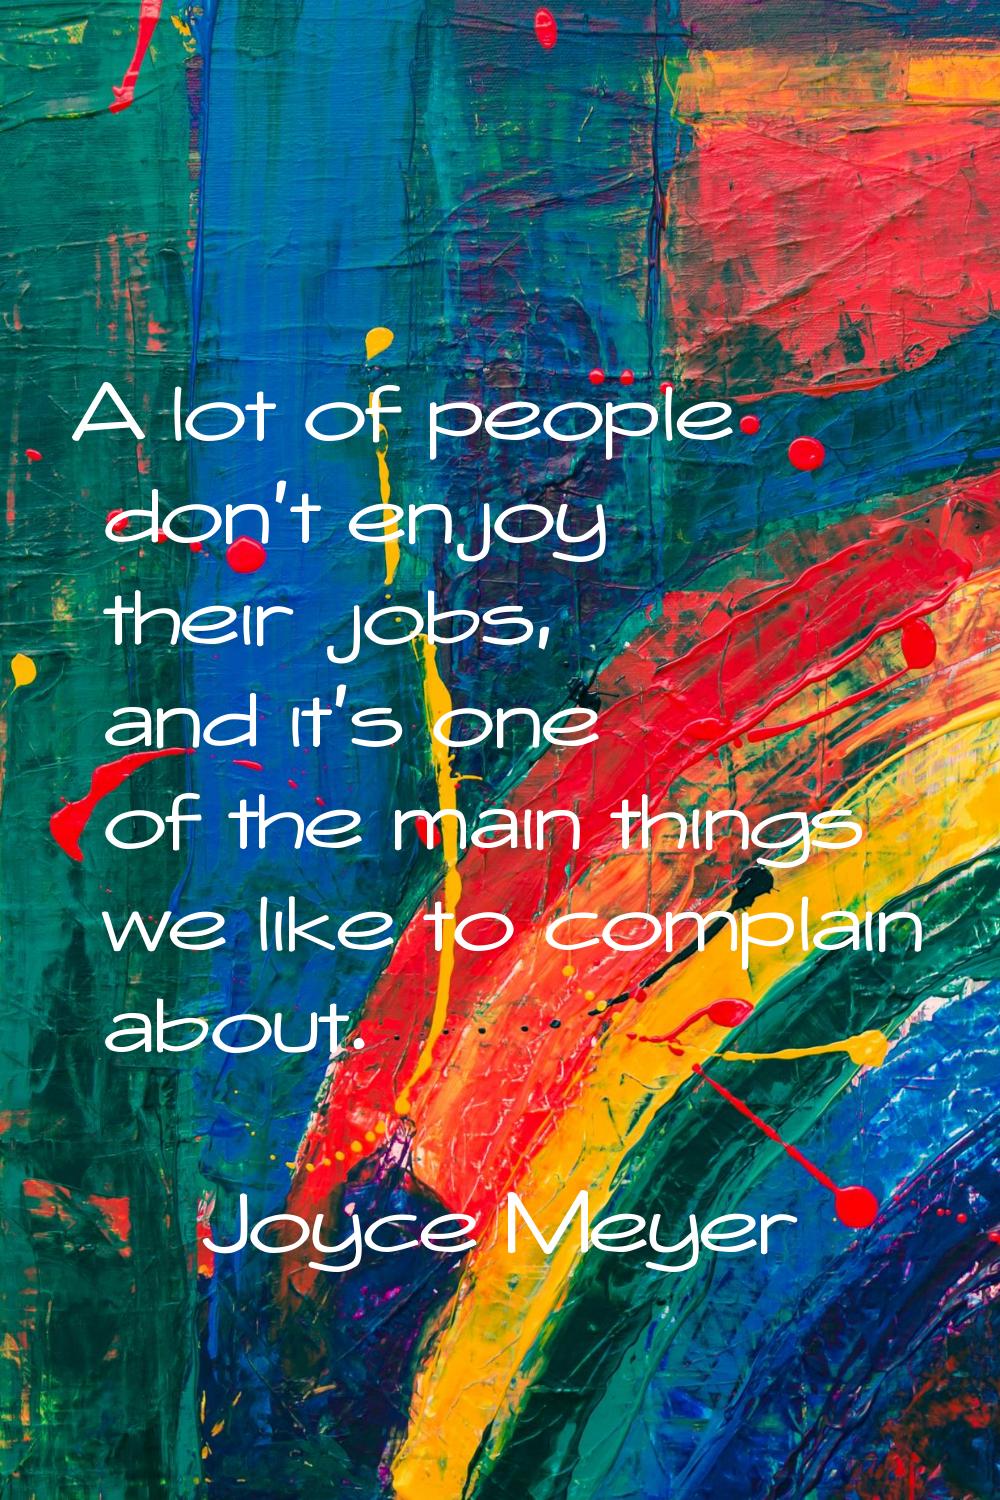 A lot of people don't enjoy their jobs, and it's one of the main things we like to complain about.